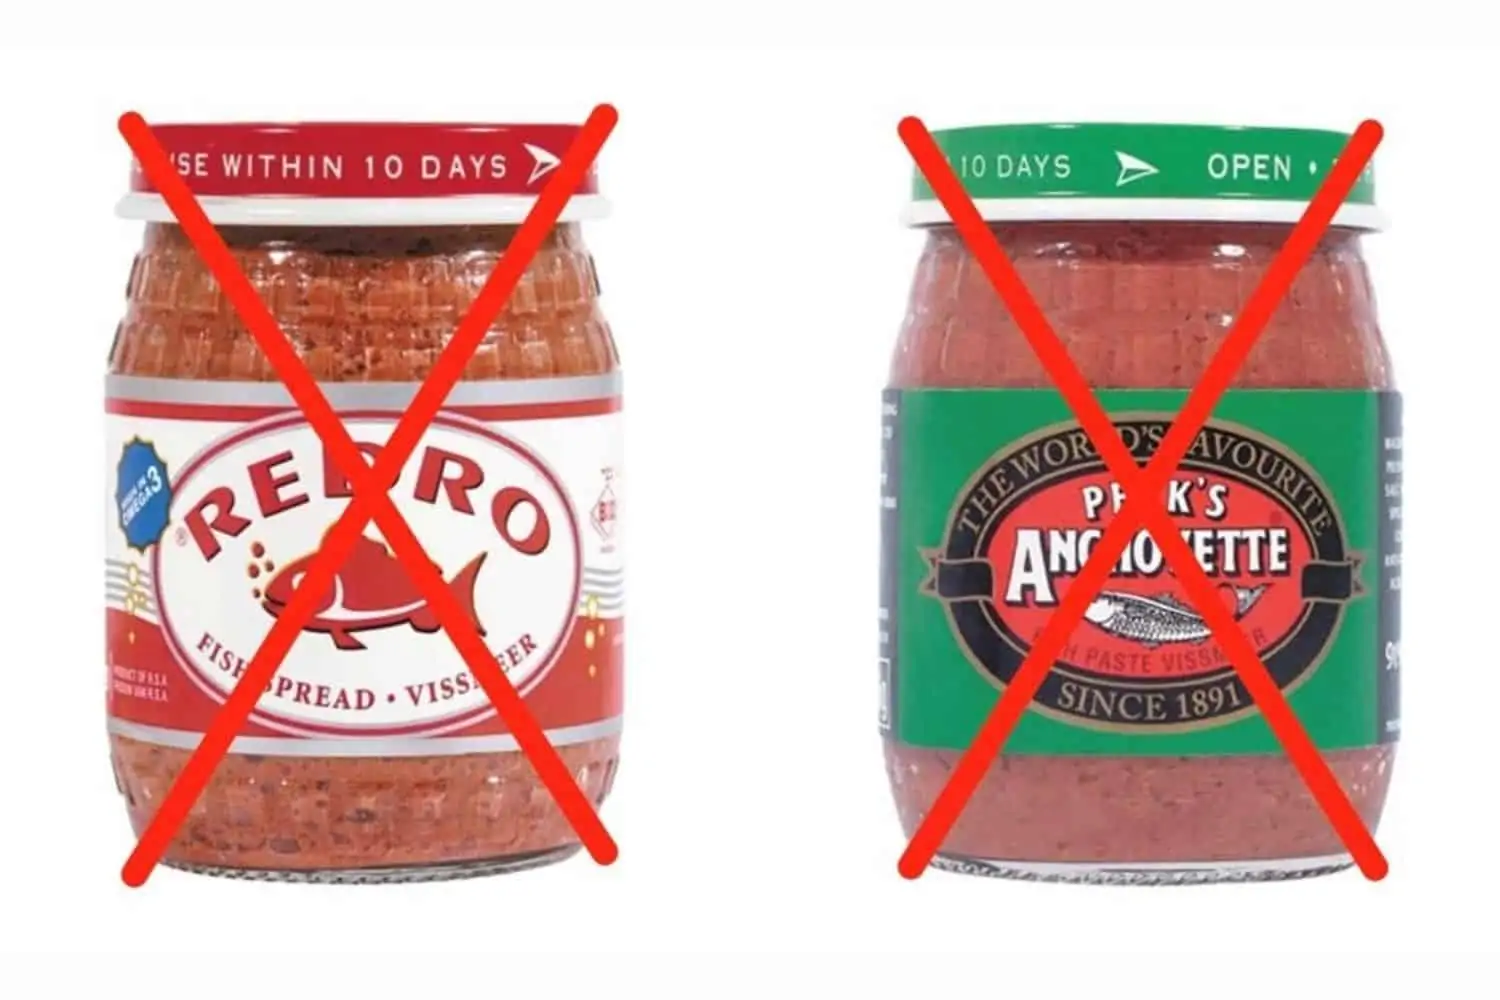 Say goodbye to your favourite fish paste brands! Here's where to get the last of Redro and Pecks Anchovette